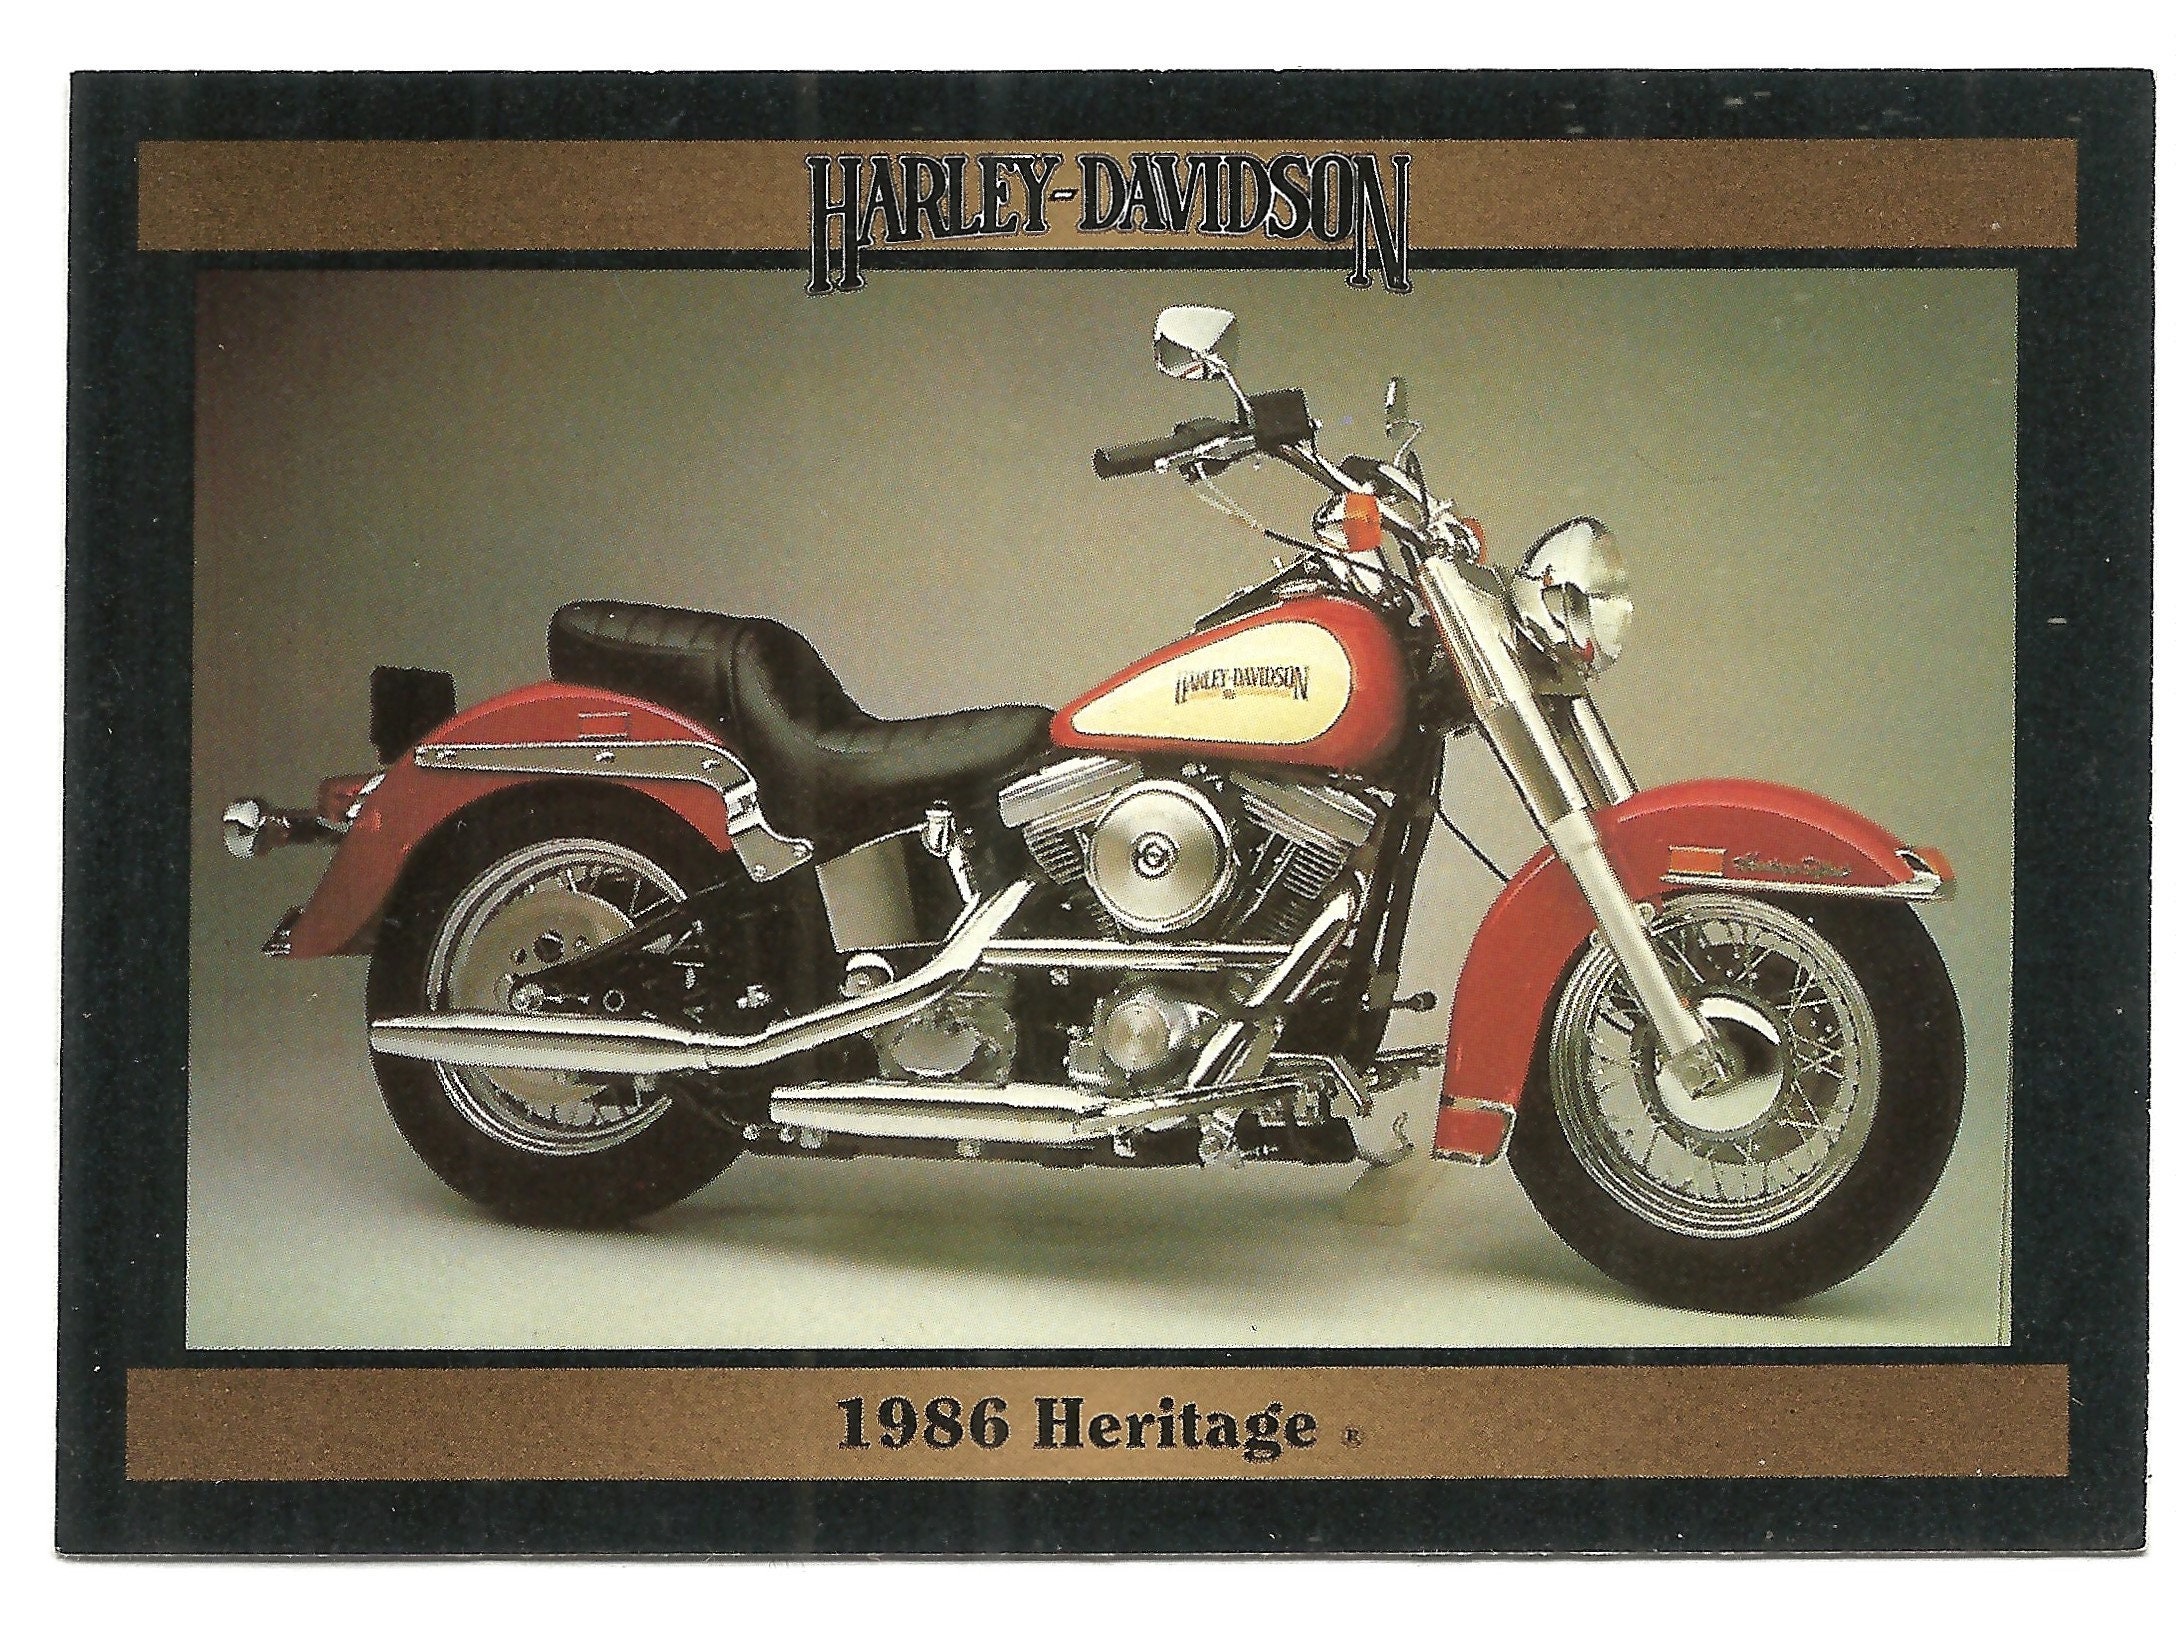 Cave Home Wall Decor/Bar/Cafe/Garage/Beer Sign Dorm Room Decor in Signs Metal Poster Gift 20cm X 30cm Harley Davidson Inspired Grumpy Motorcycle Chopper Novelty Gift 